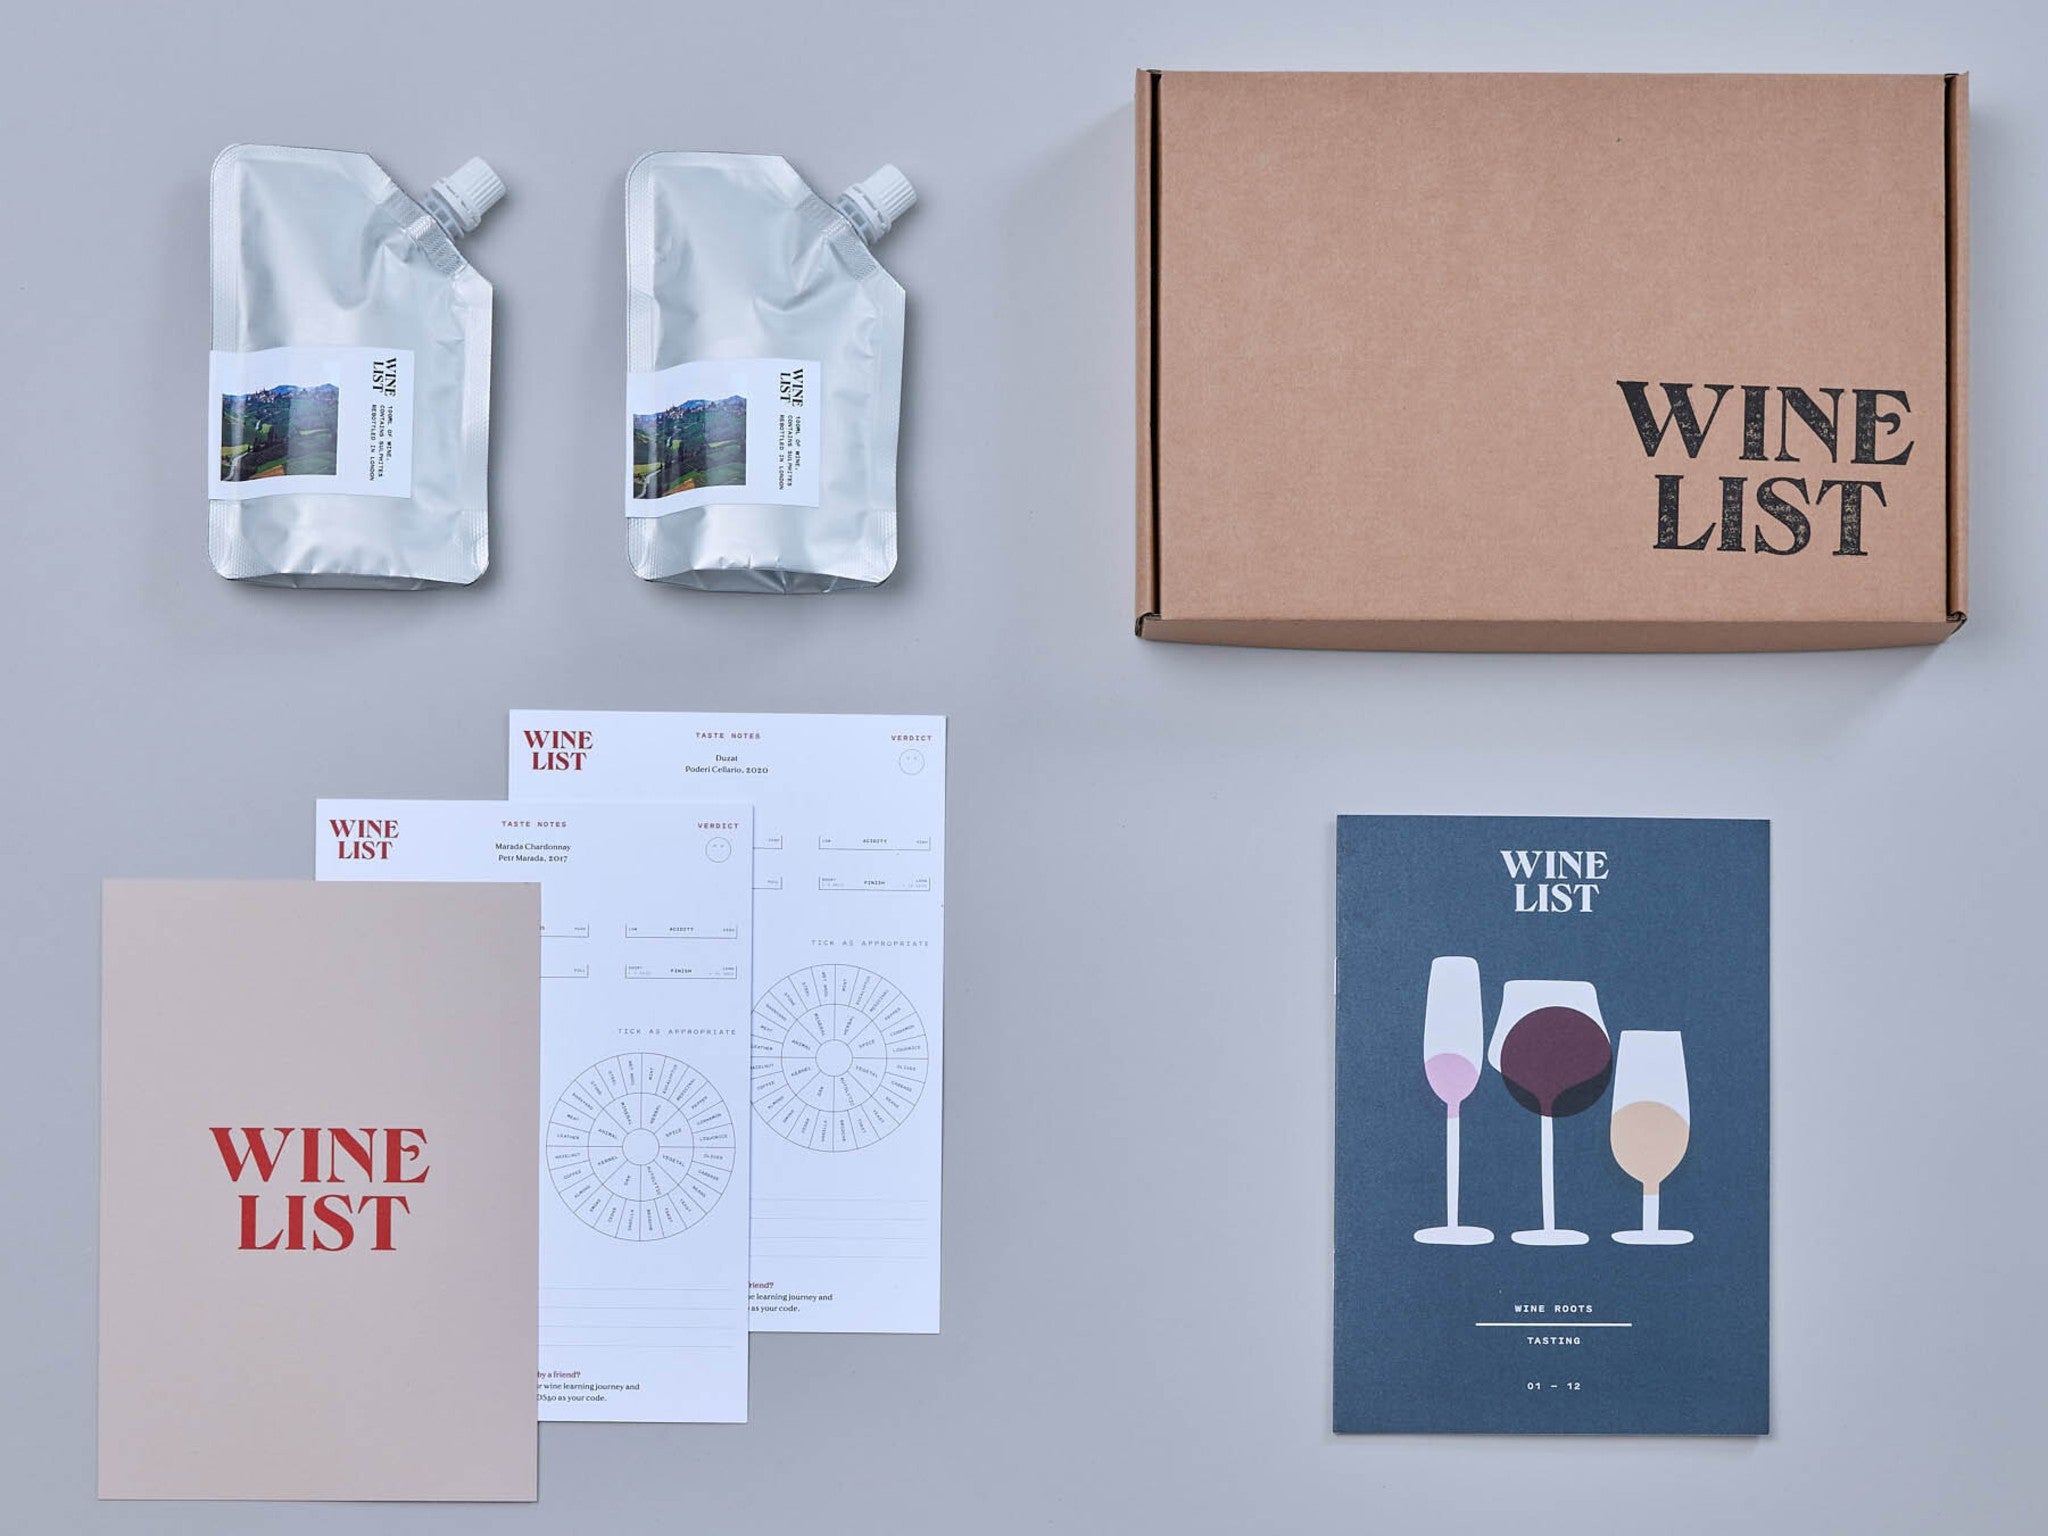 Wine List – By The Glass subscription box indybest.jpeg